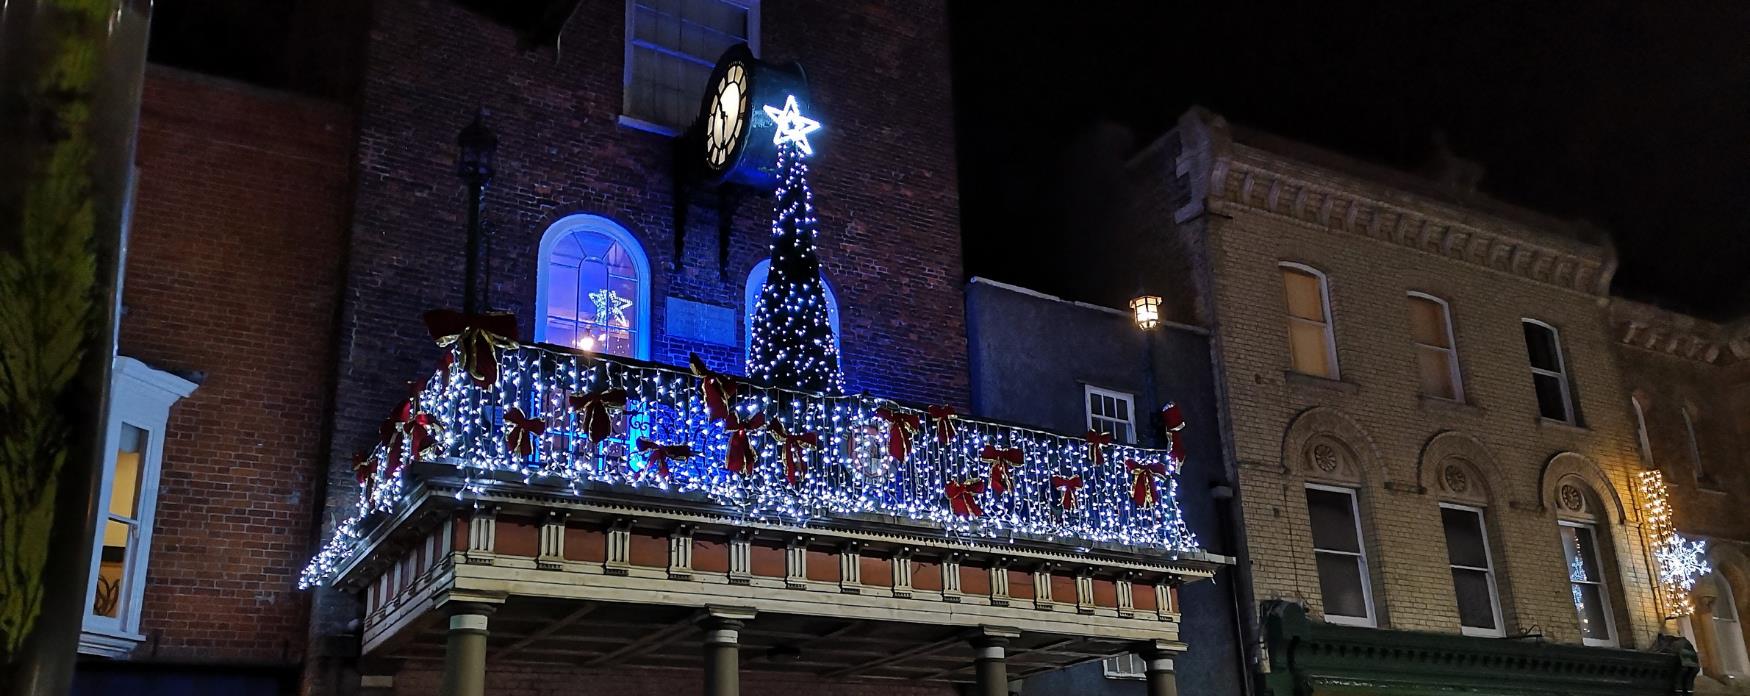 The Moot Hall in Maldon lit up with Christmas lights